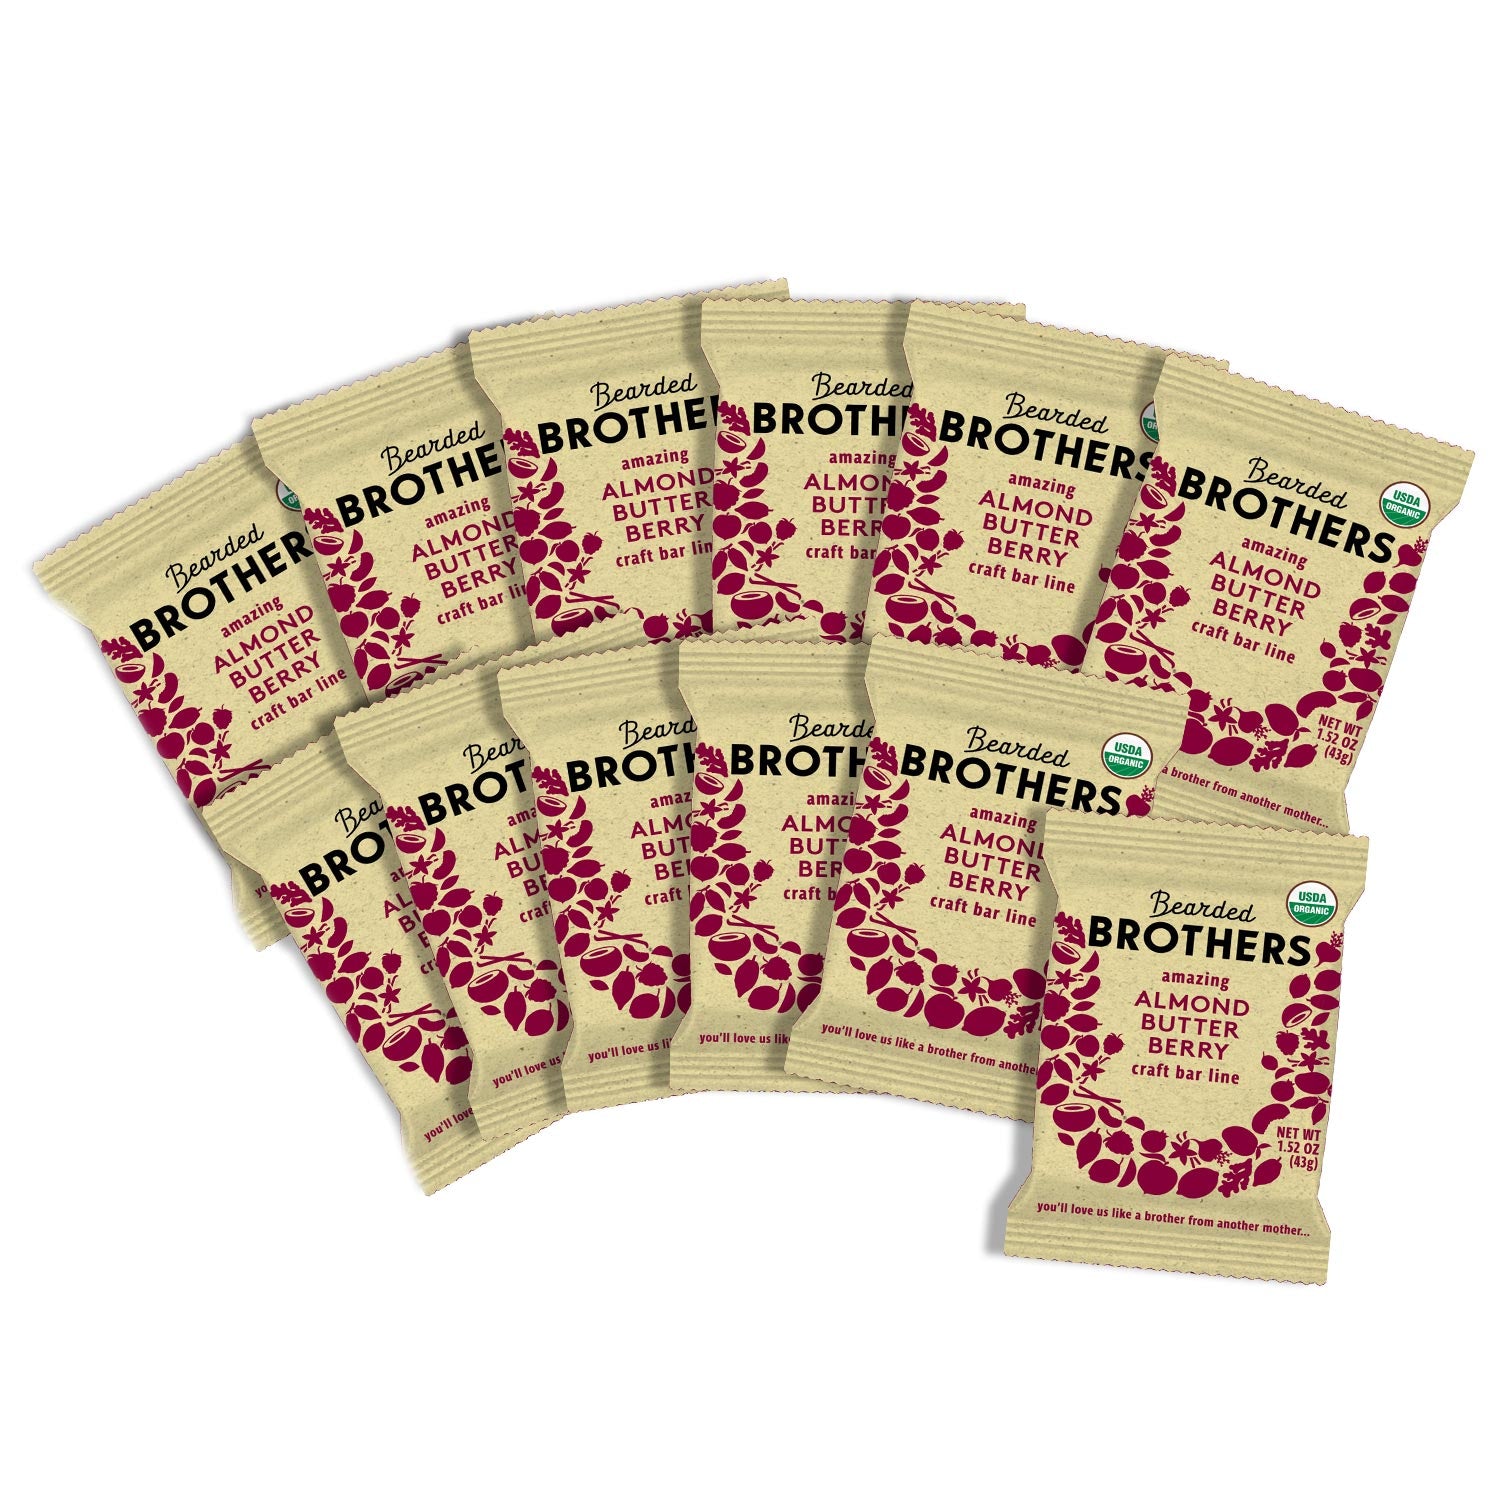 Amazing Almond Butter Berry Craft Bars (12 Pack)